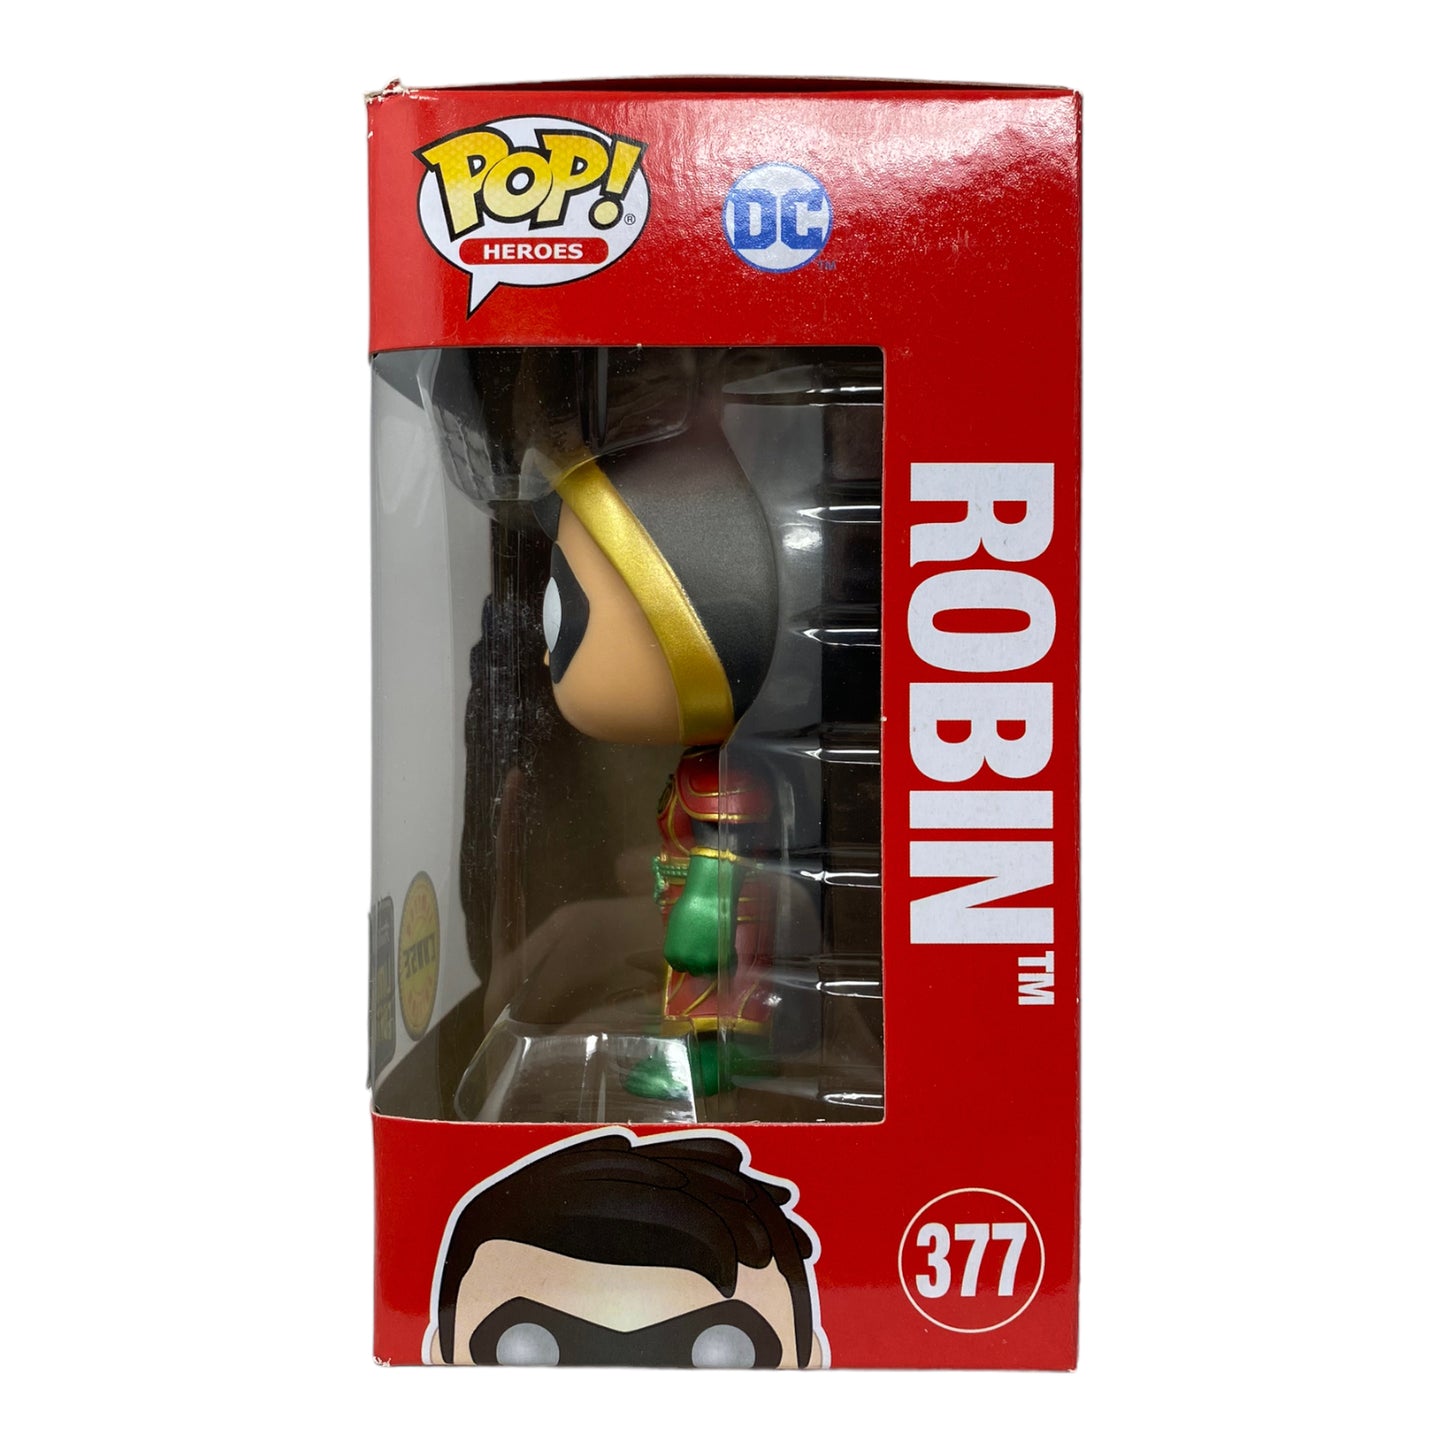 2021 - Robin (Imperial Palace, Hooded Chase, Metallic) 377